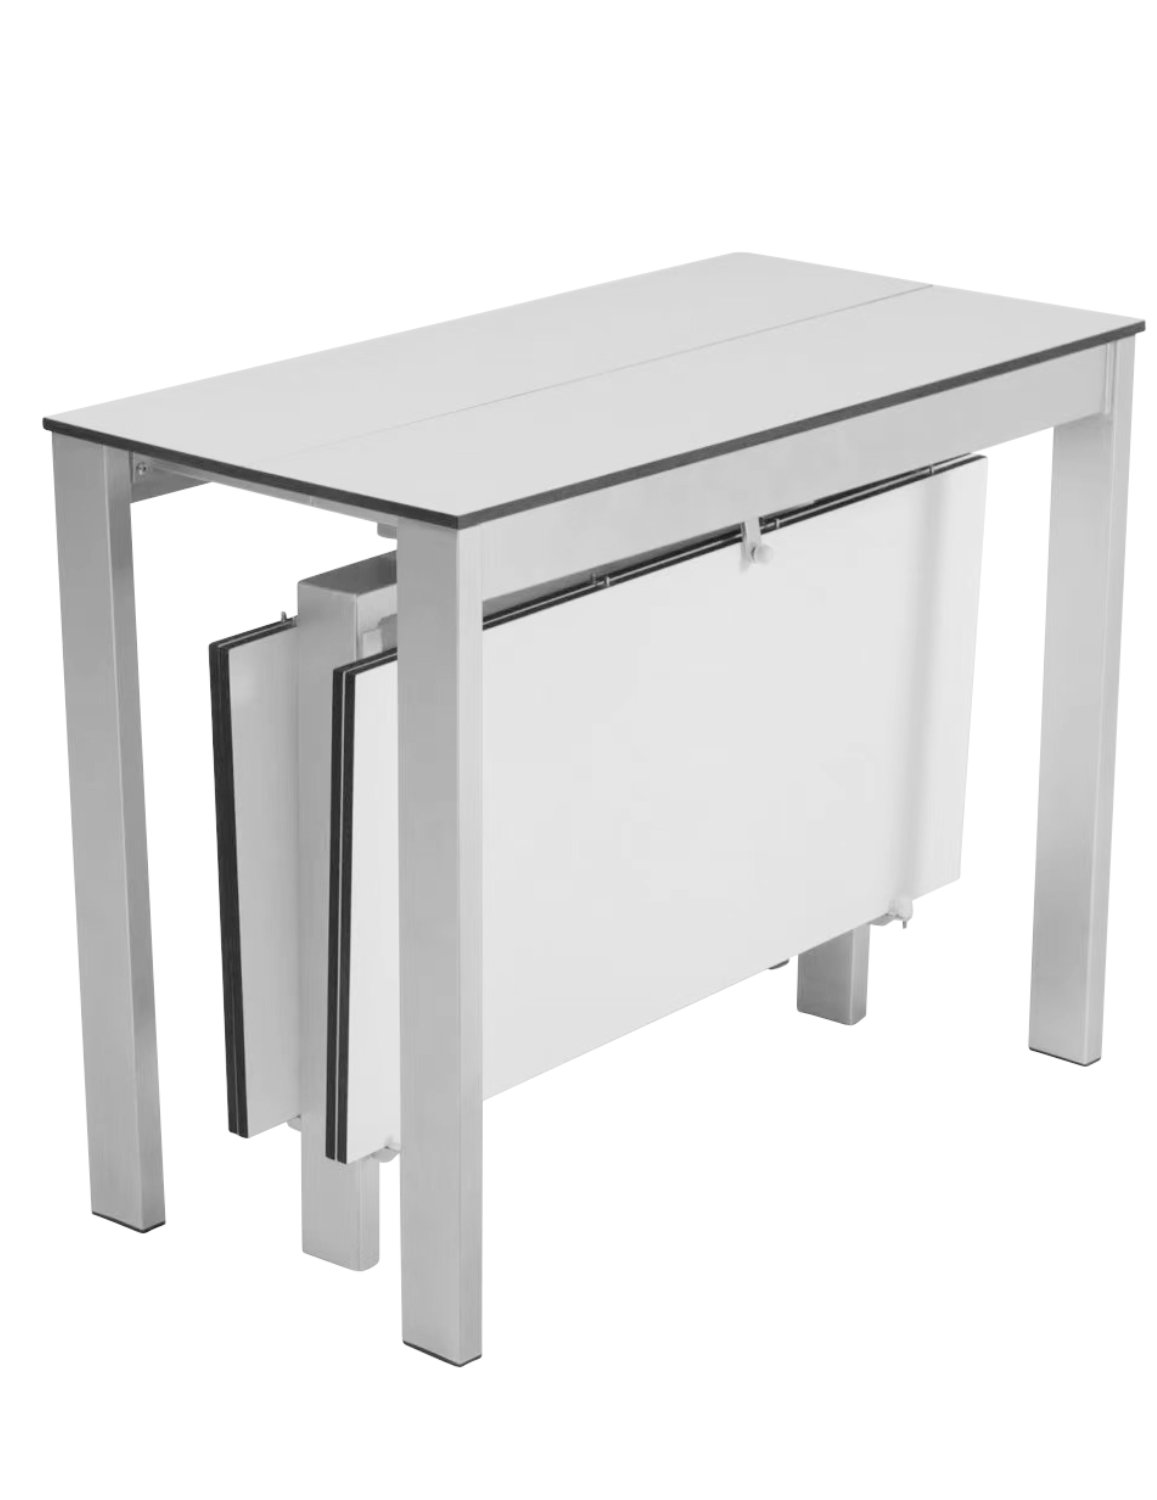 Echo – Small Square Folding Kitchen Table - Expand Furniture - Folding  Tables, Smarter Wall Beds, Space Savers